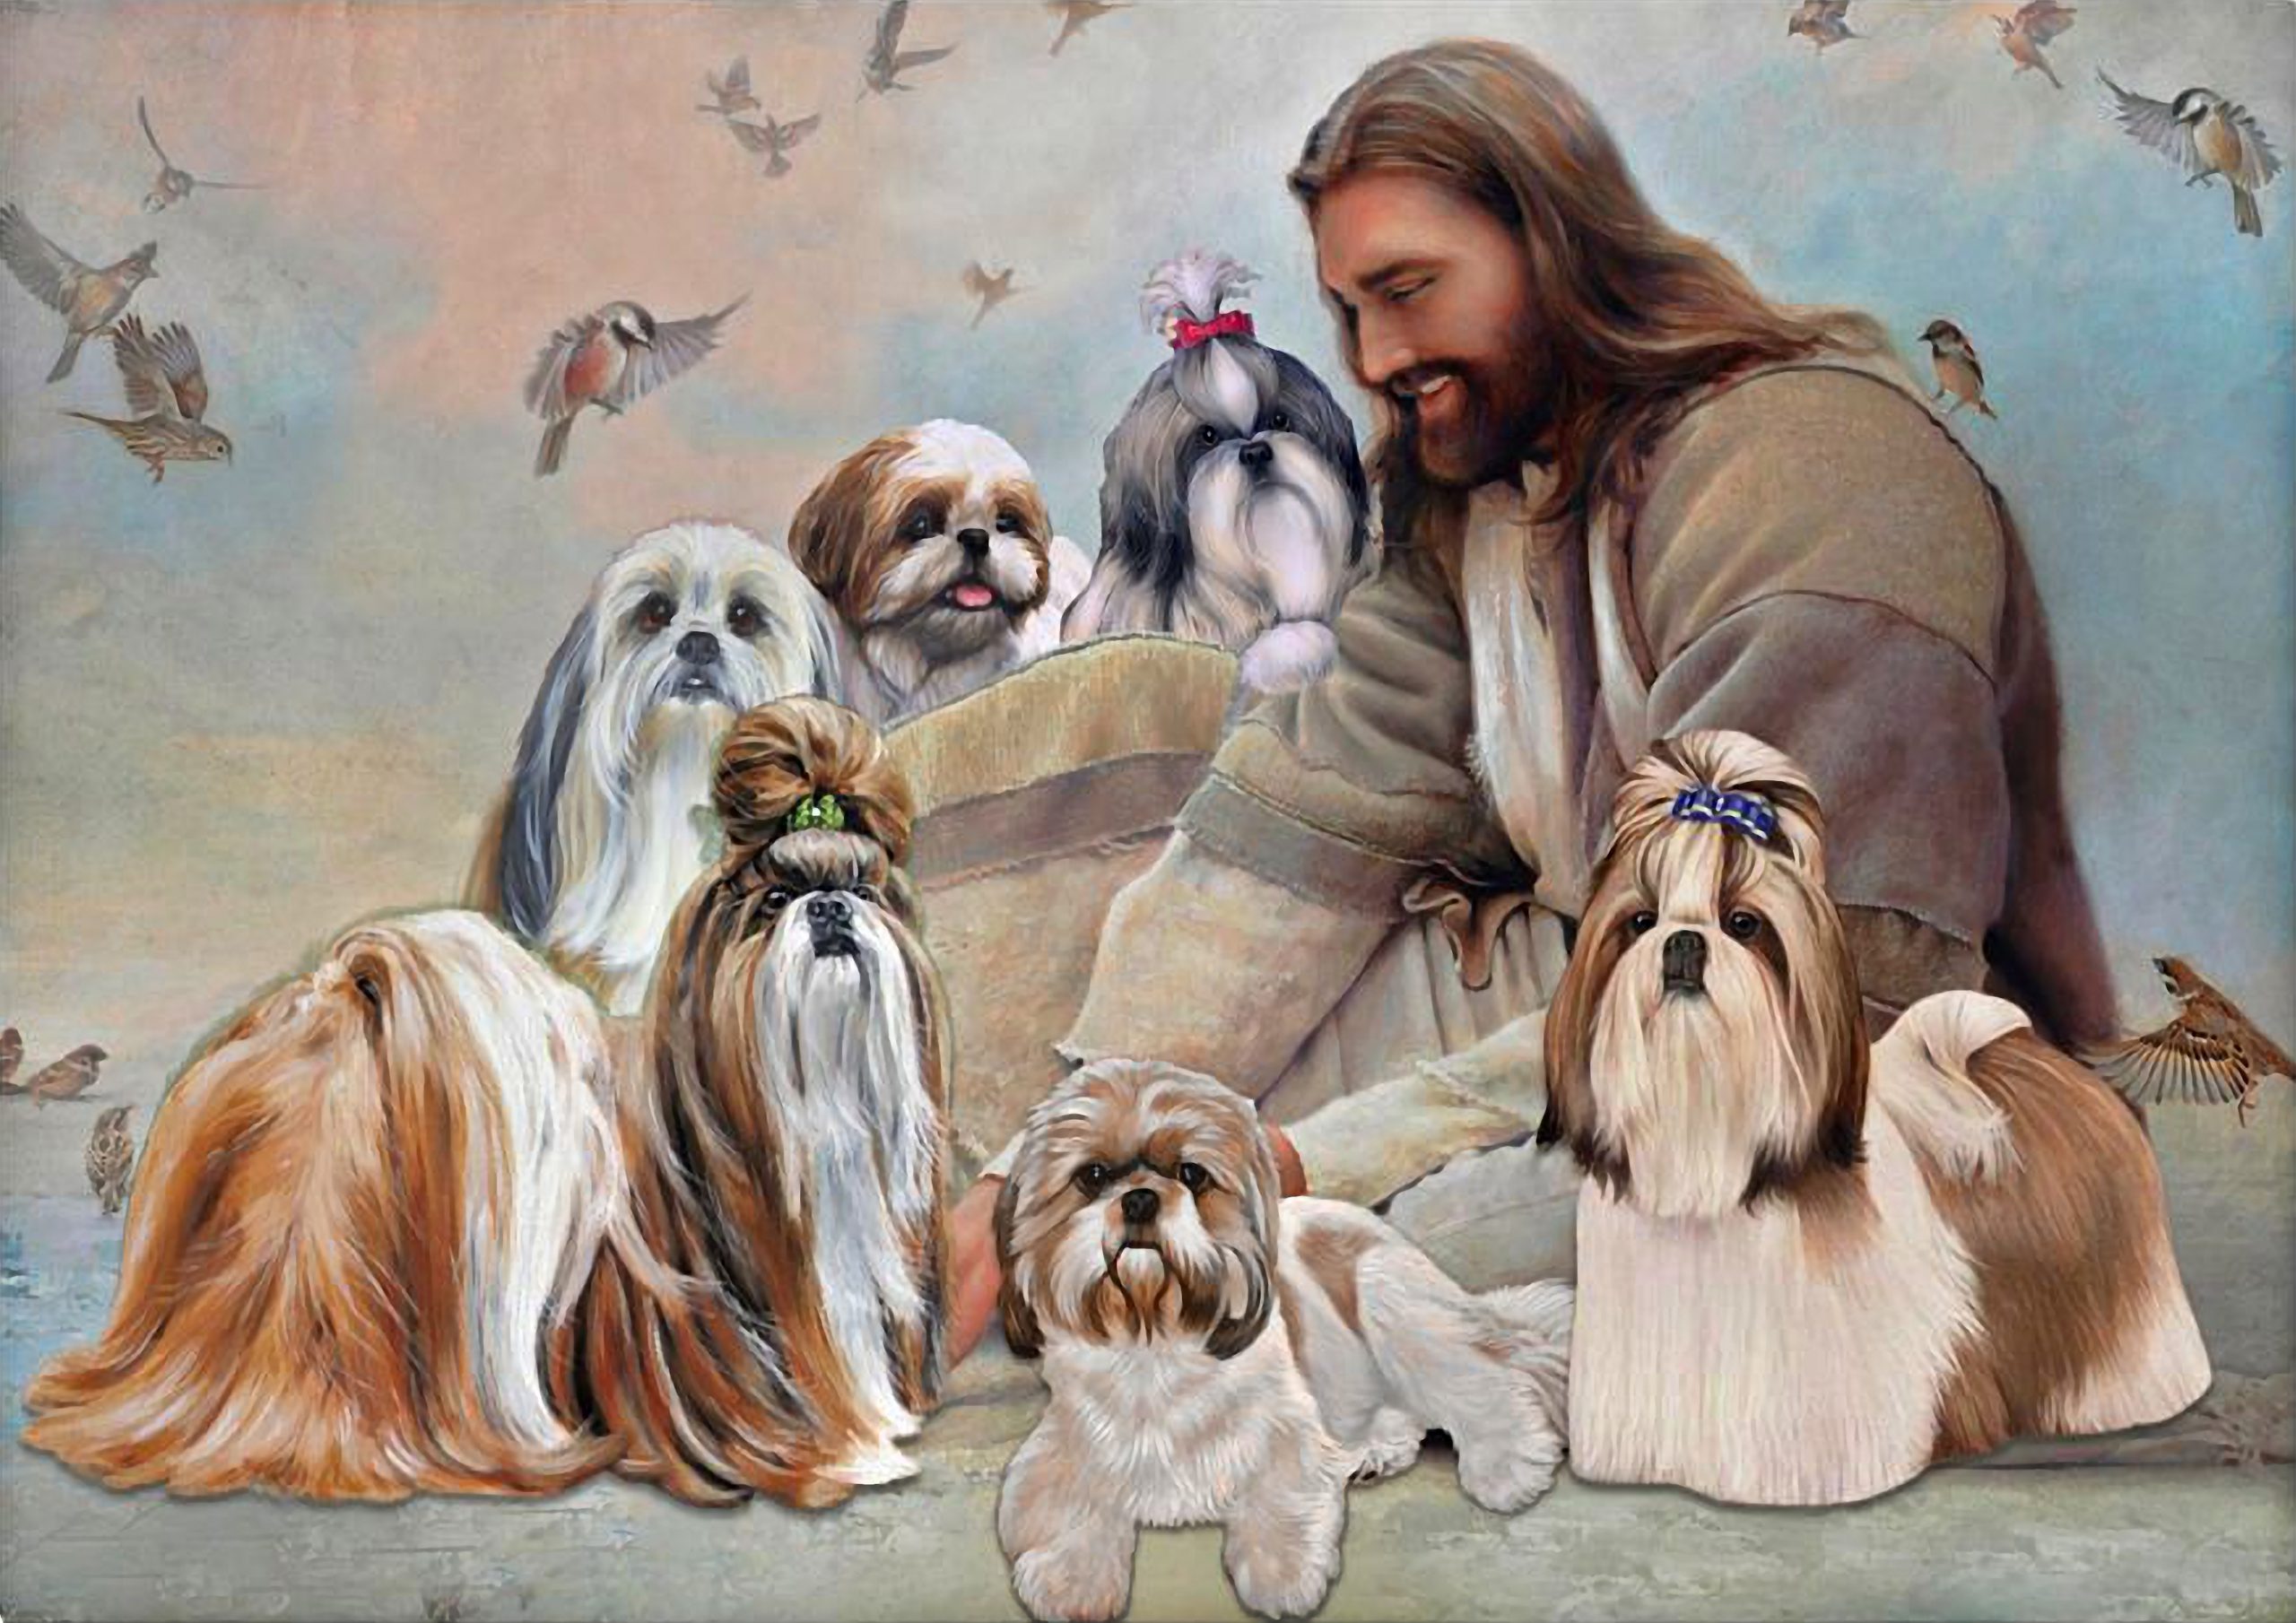 God surrounded by Shih Tzu angel poster